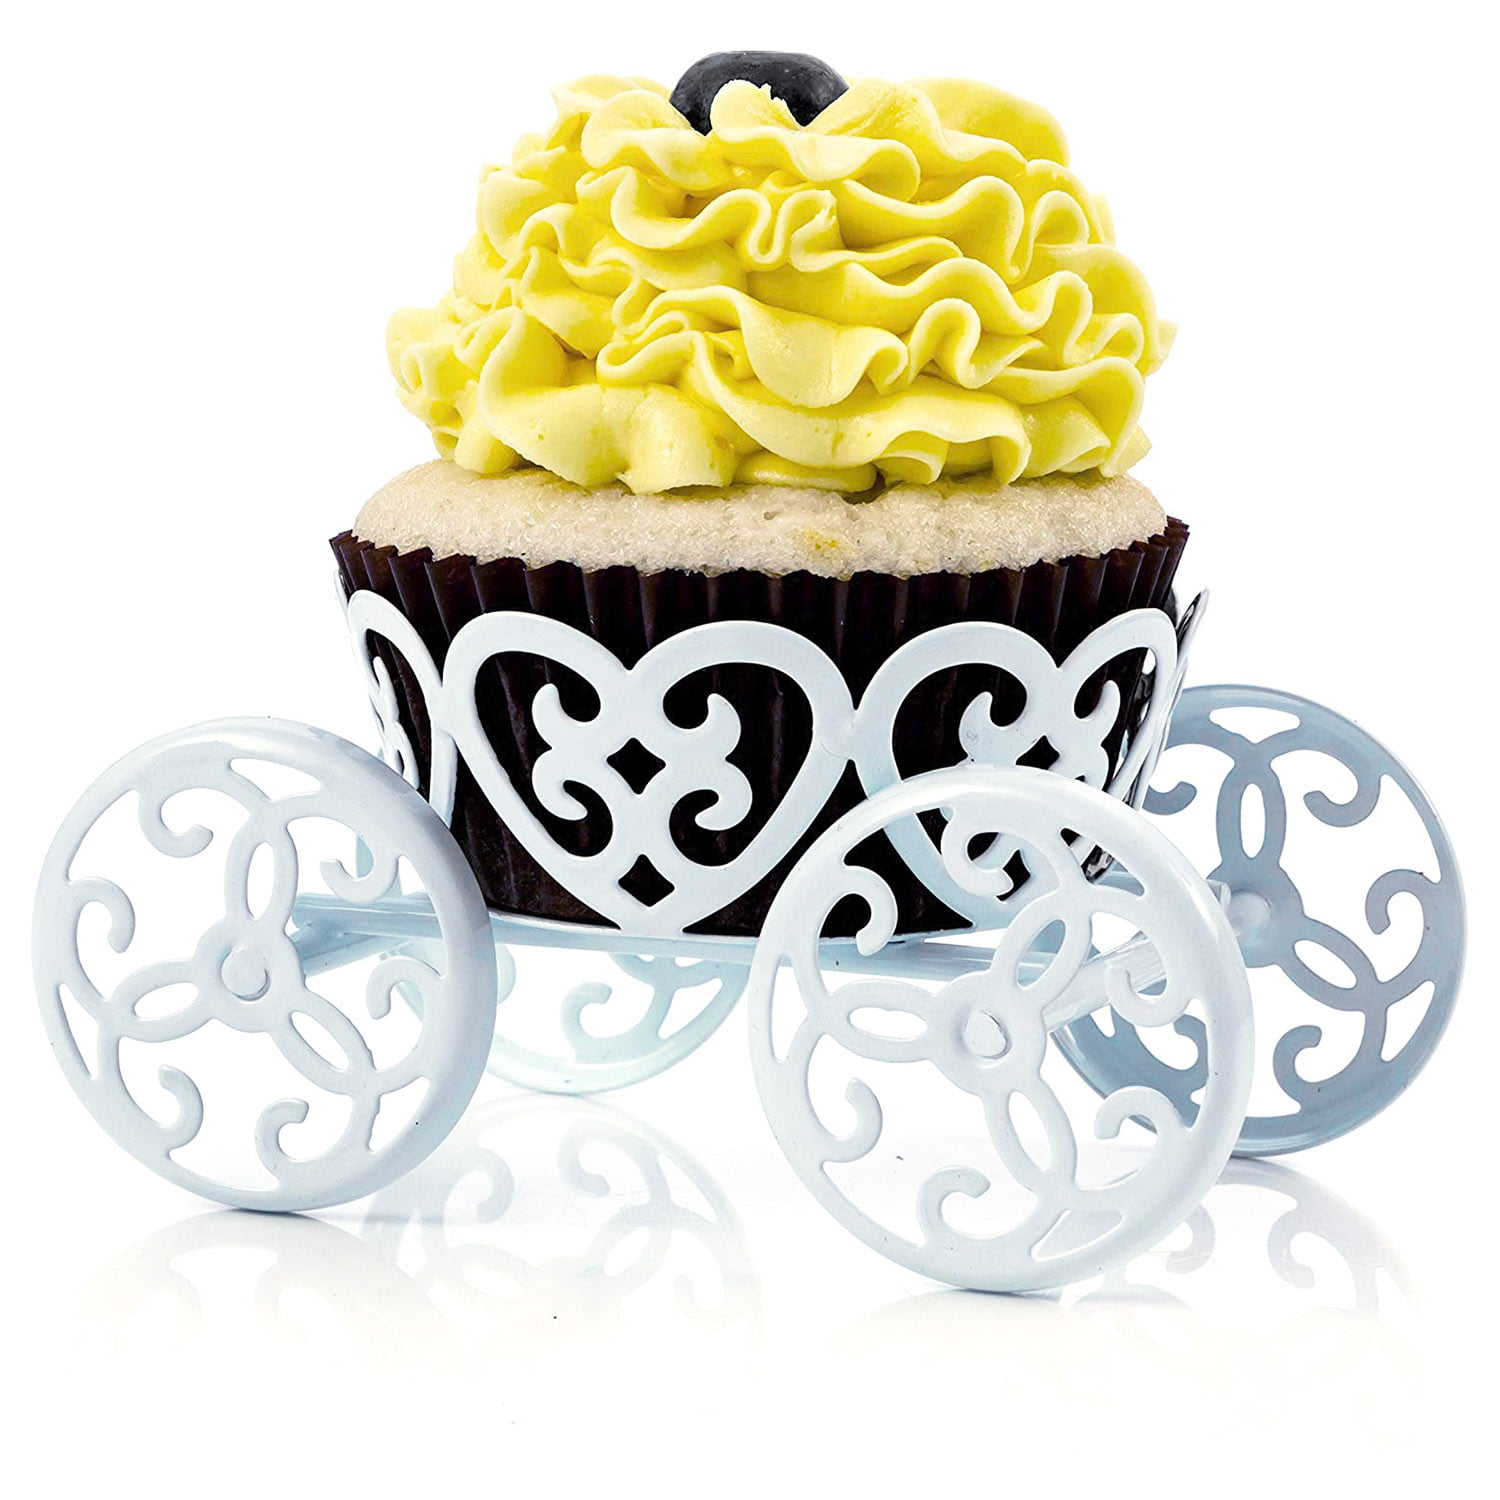 Crown carriage lolly pop mini cupcake stand 